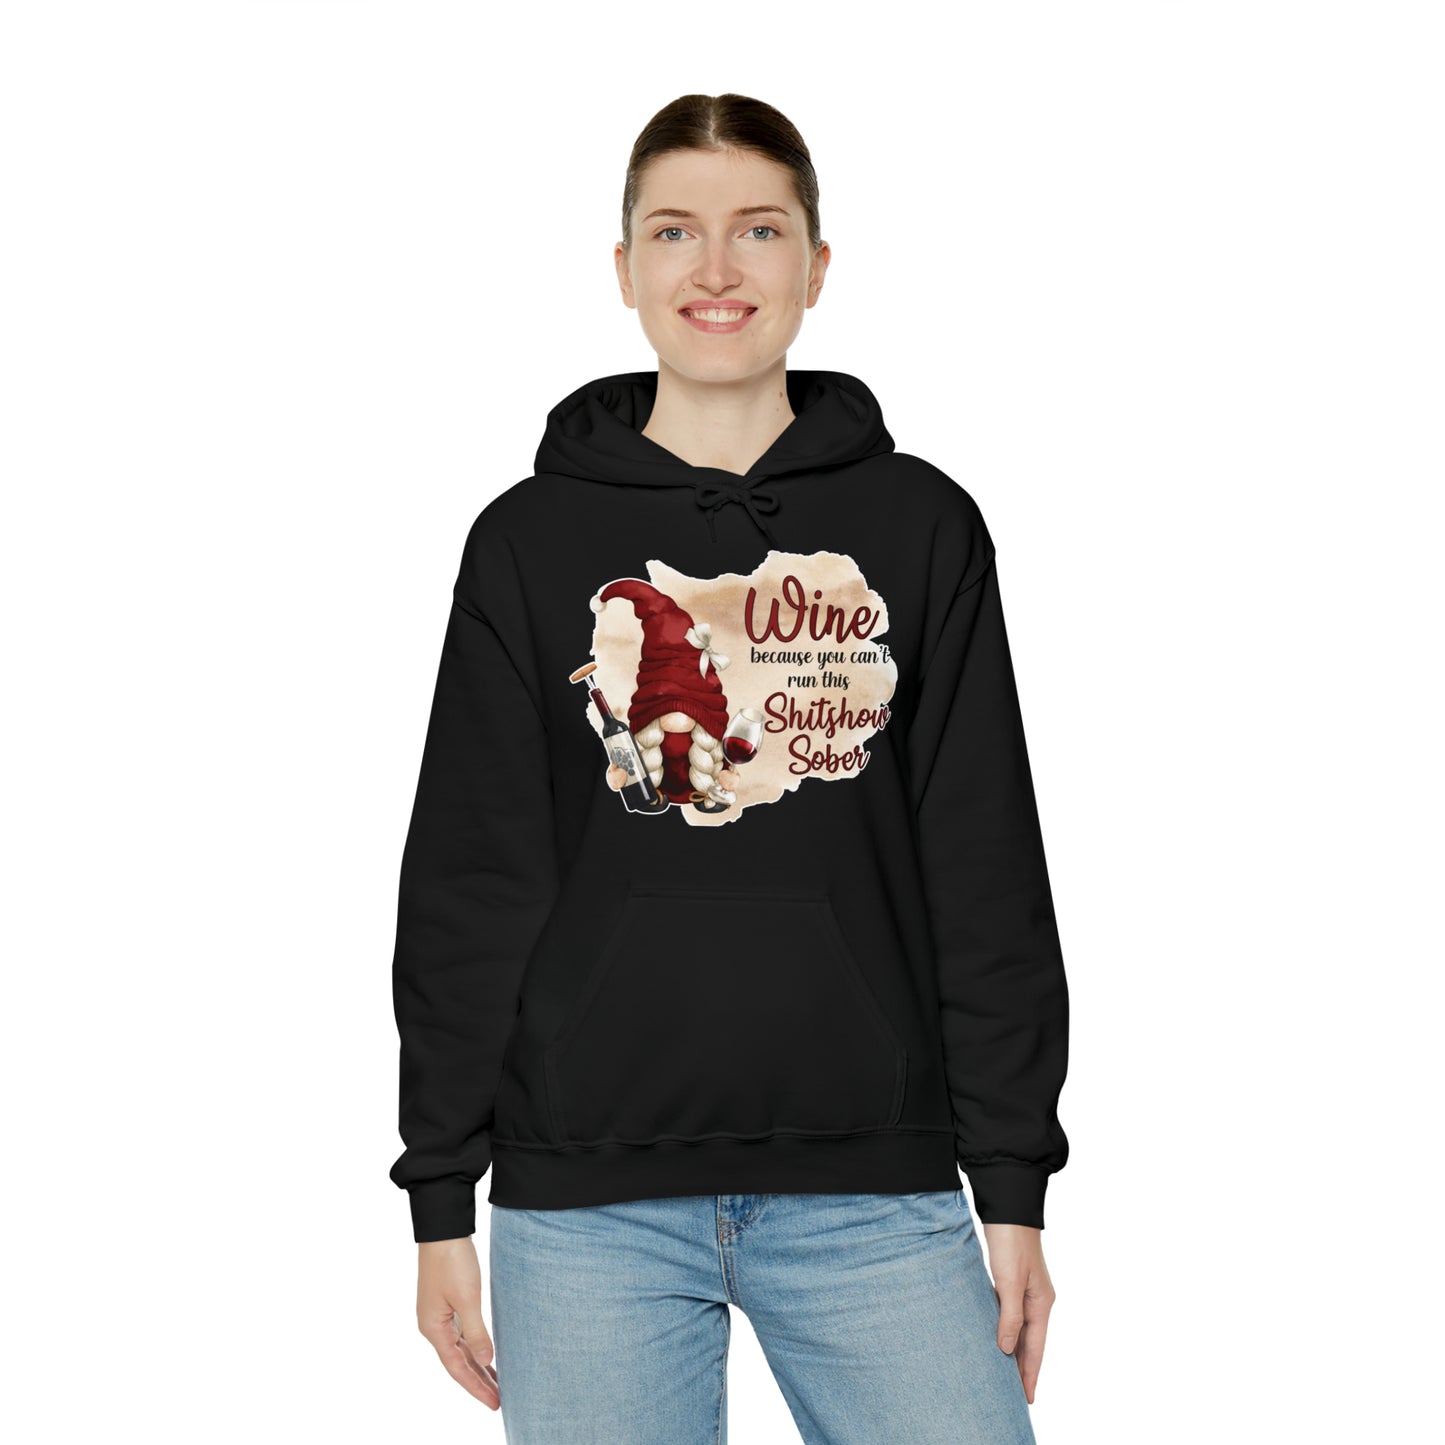 Wine, Because You Can't Run This Shitshow Sober: Unisex Heavy Blend™ Hooded Sweatshirt